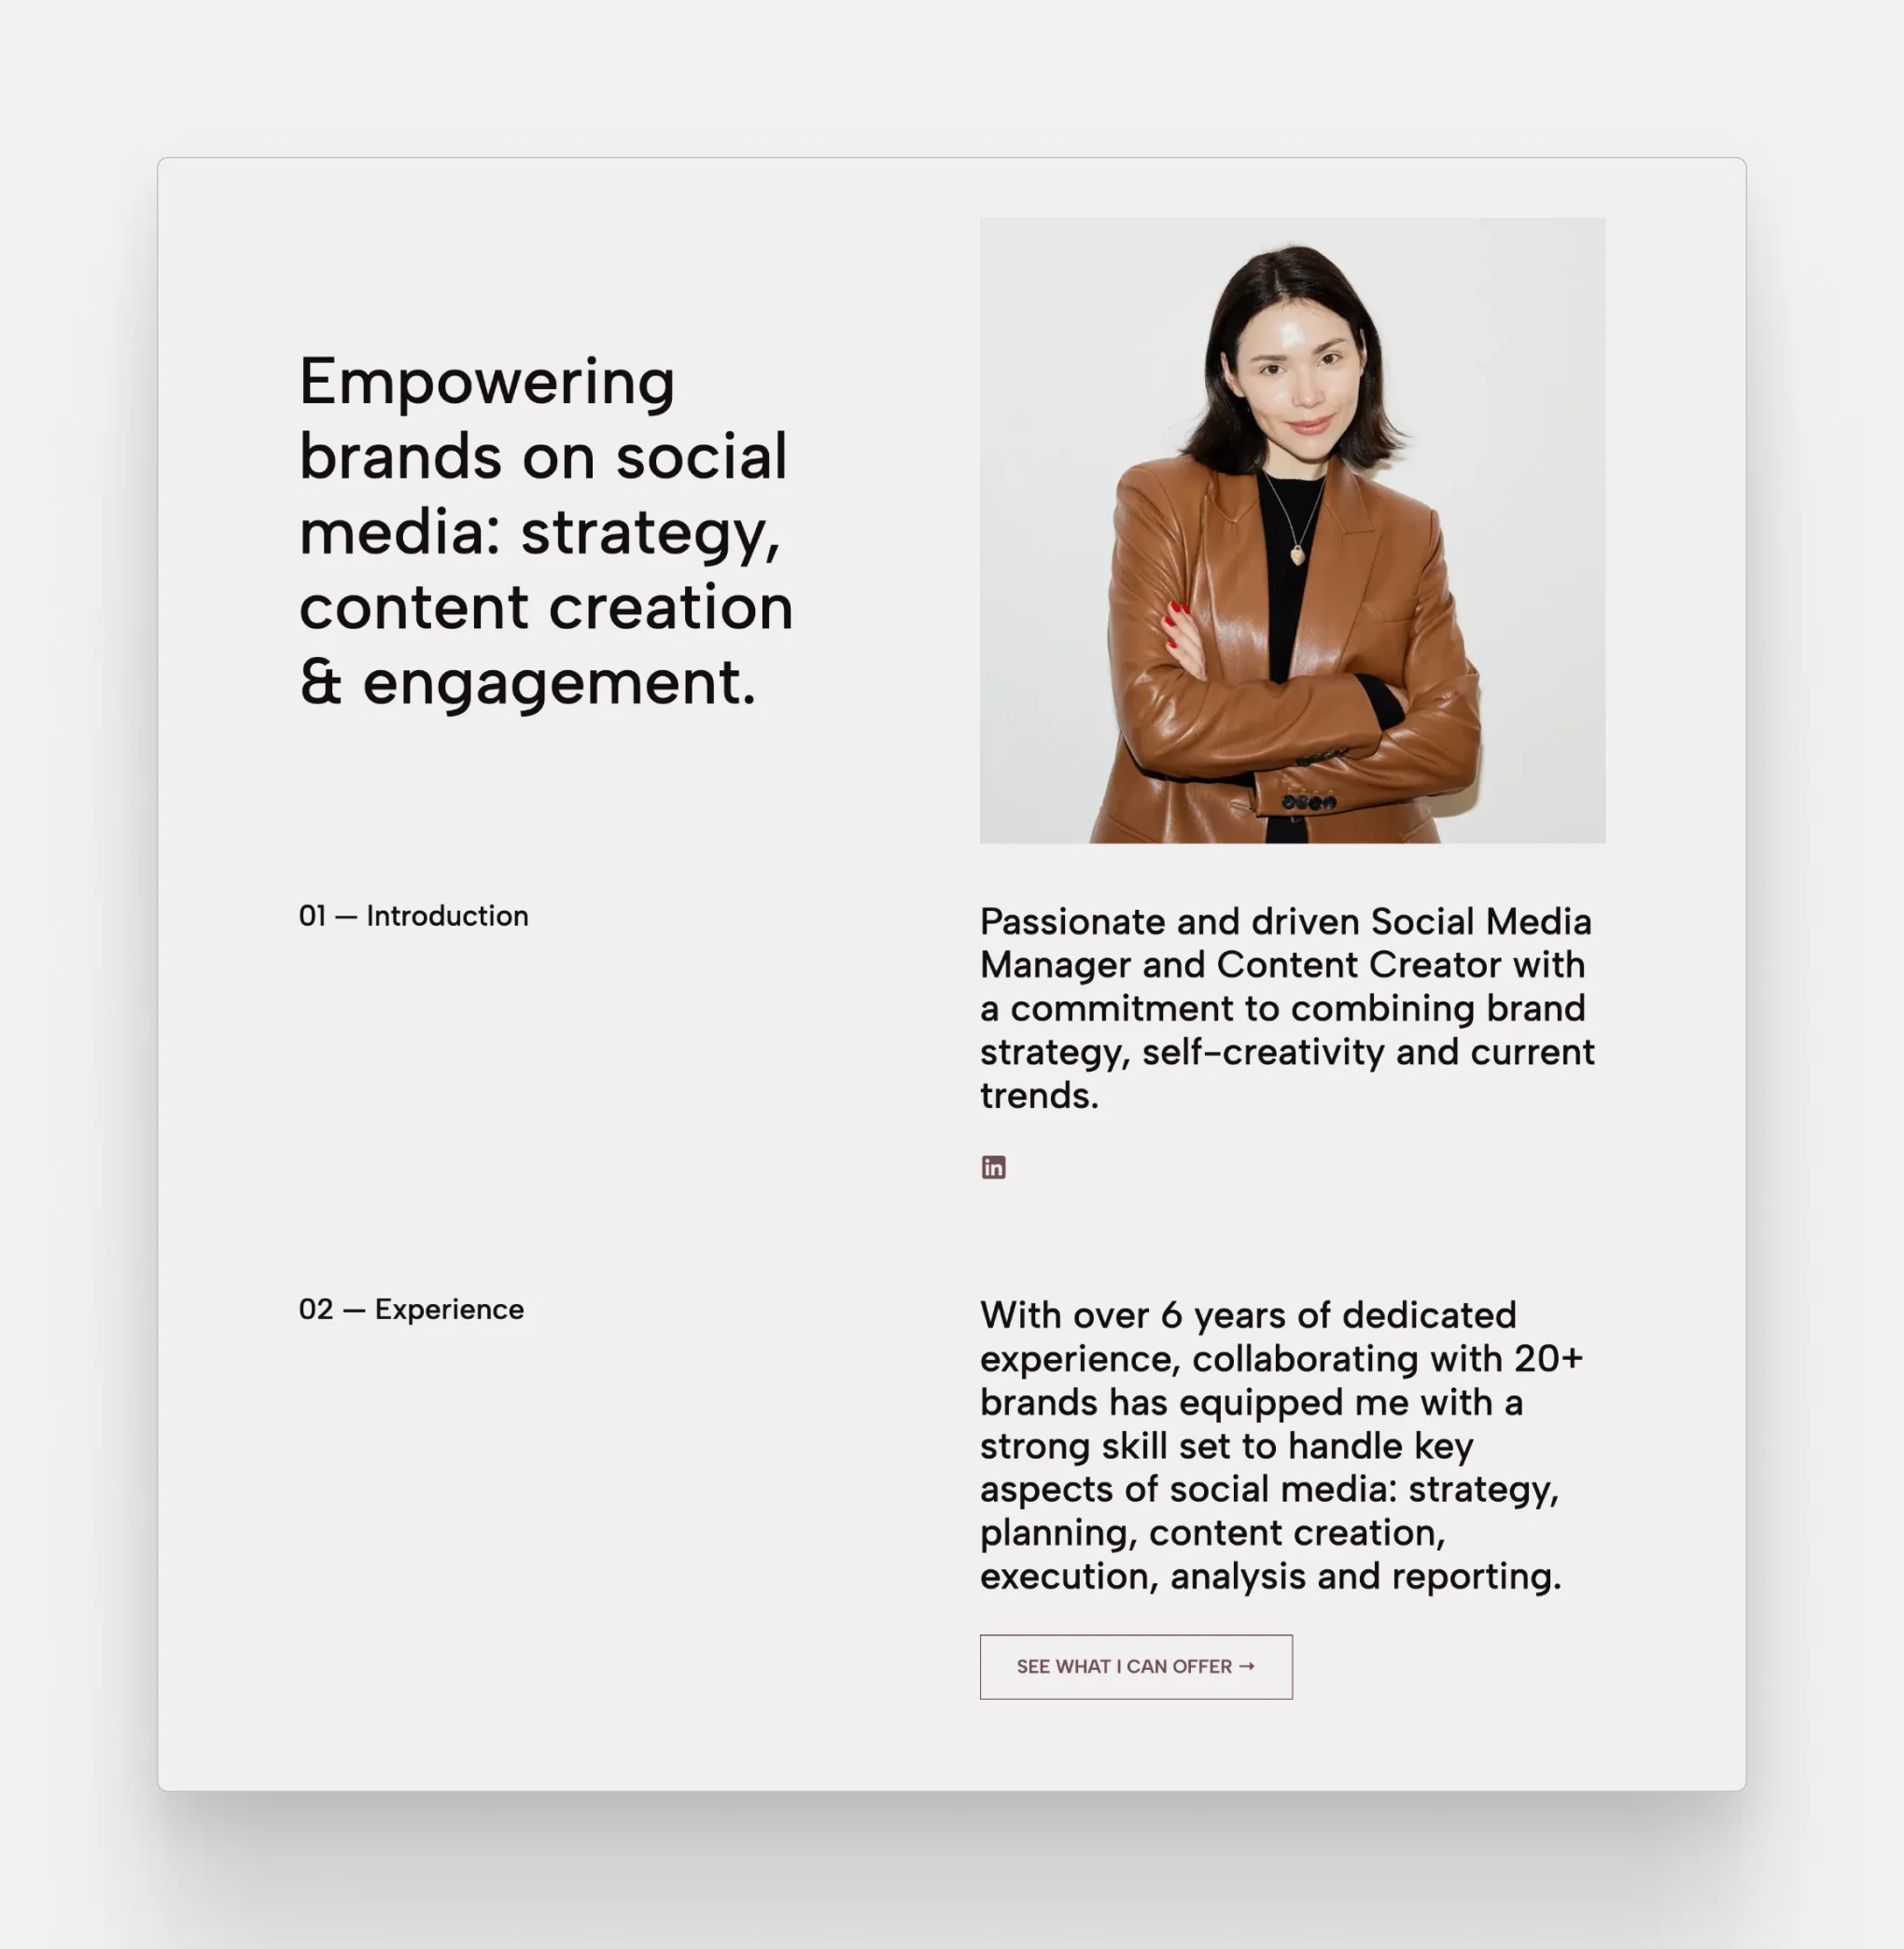 The homepage of Valeriia Ivanova's portfolio website, where the introduction and experience sections can work as inspiration for writing a social media manager cover letter